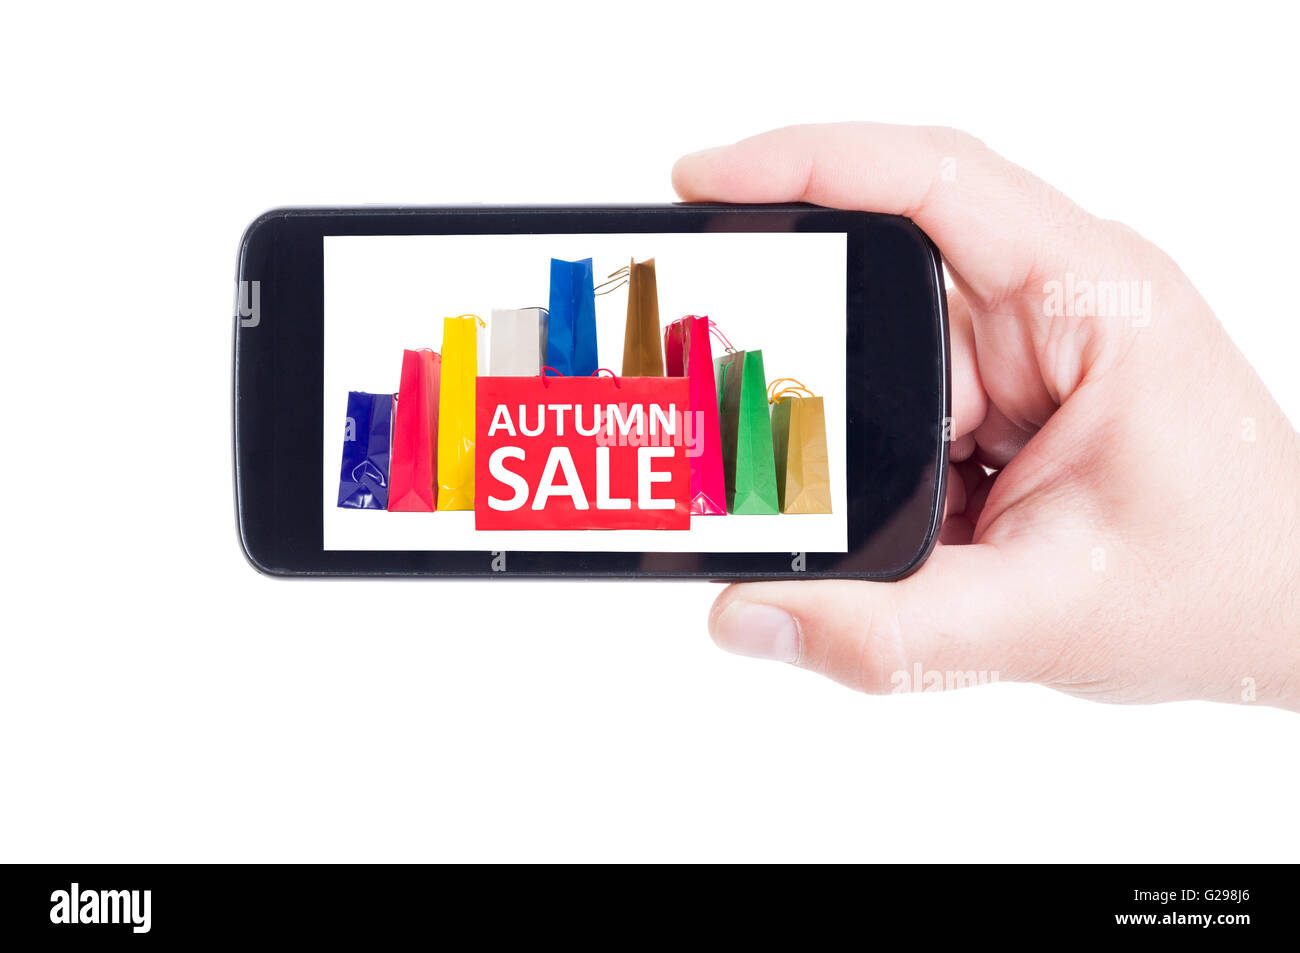 Autumn sale for online shopping using smartphone or wireless mobile device concept Stock Photo